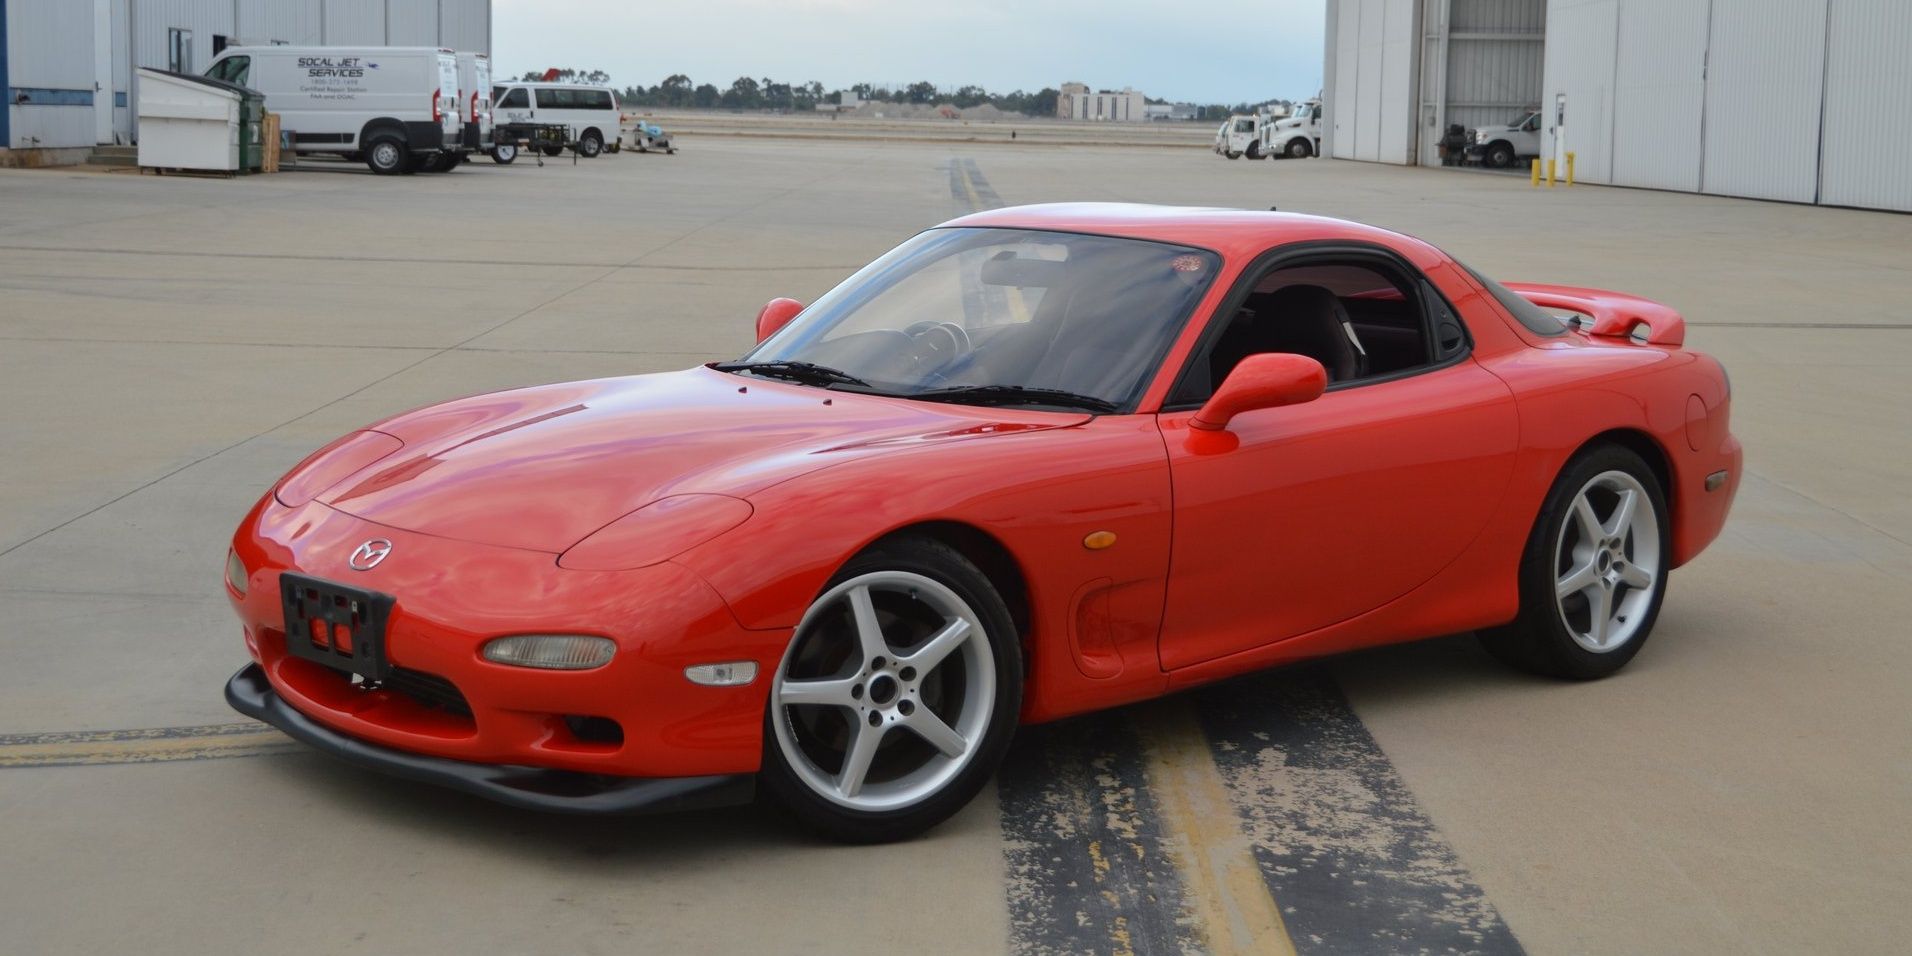 A red 1992 Mazda RX-7 parked inside an open compound